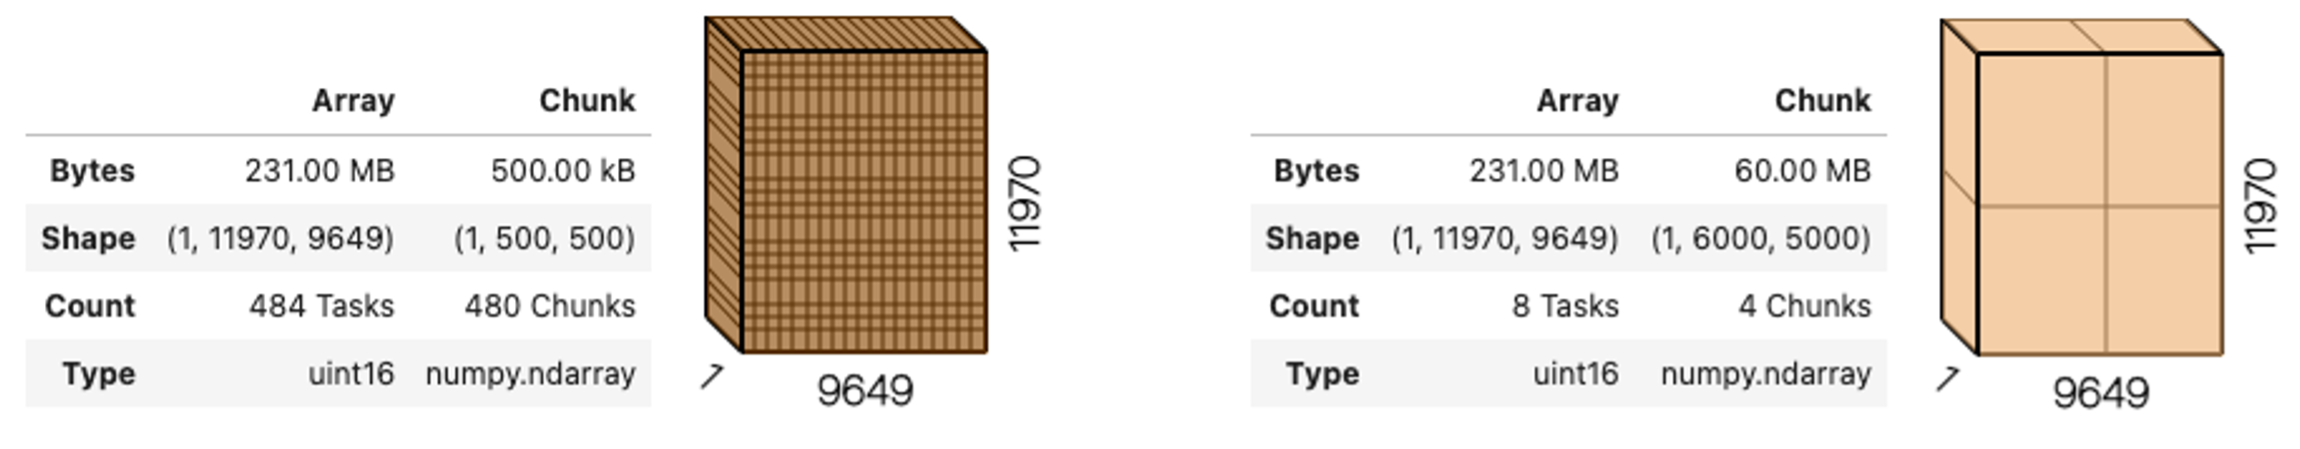 Comparison between different chunk sizes.